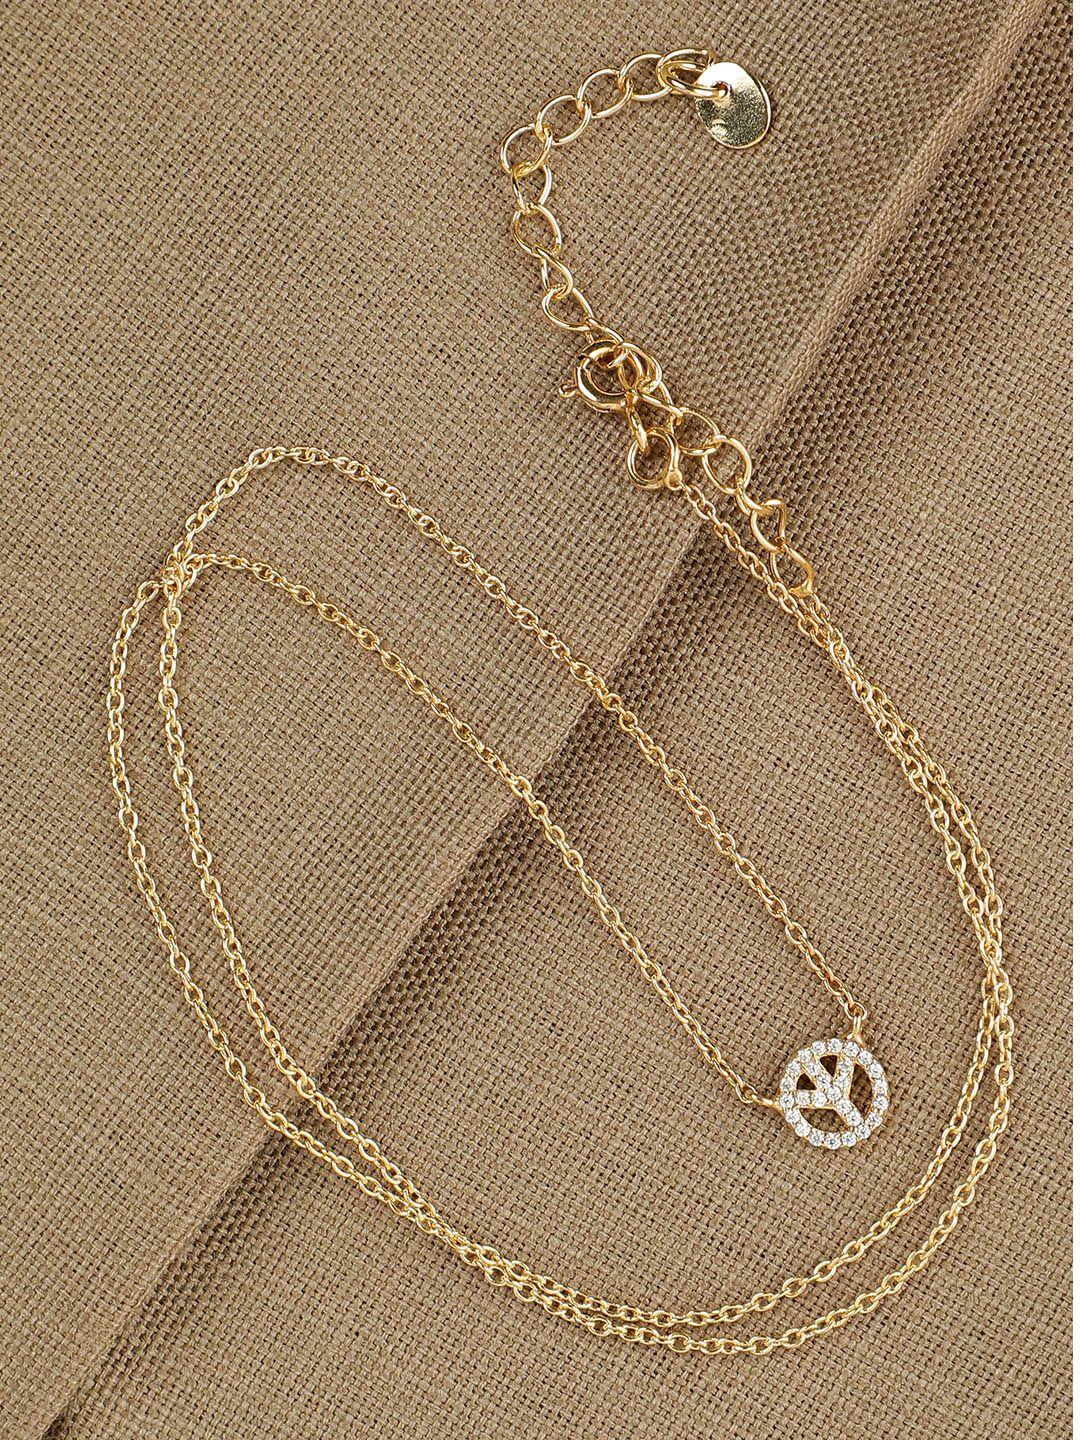 giva 925 sterling silver 18k gold plated studded peace necklace